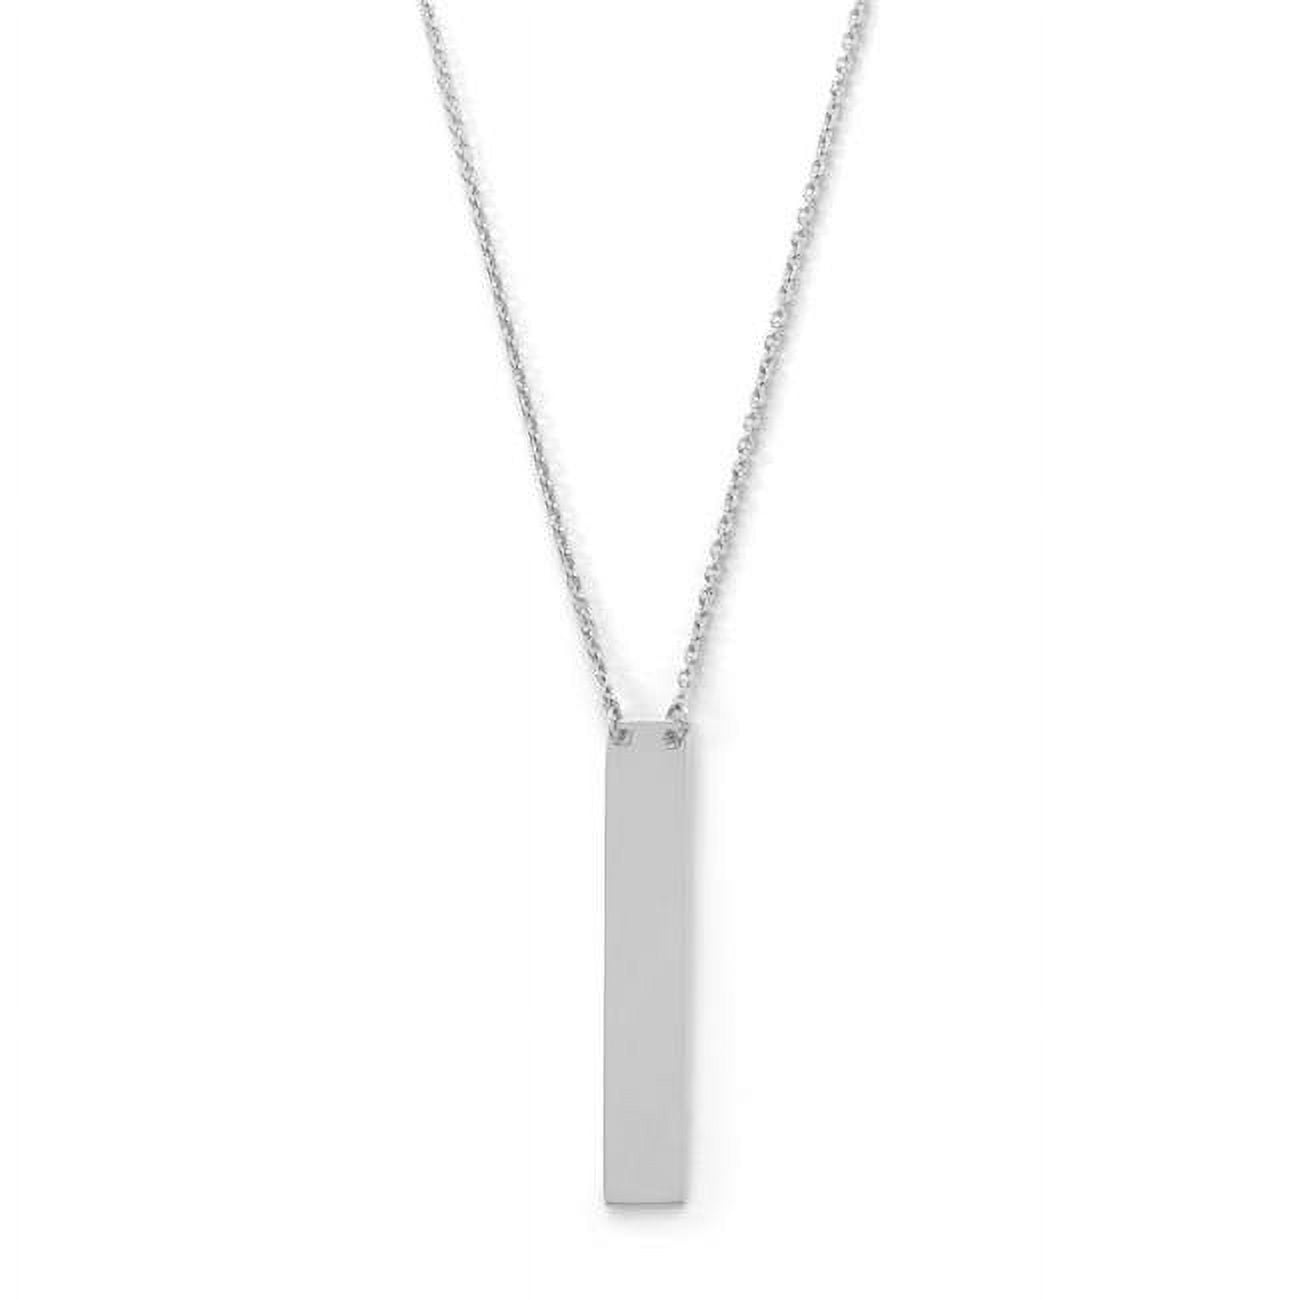 34256x Sterling Silver Vertical Bar Necklace